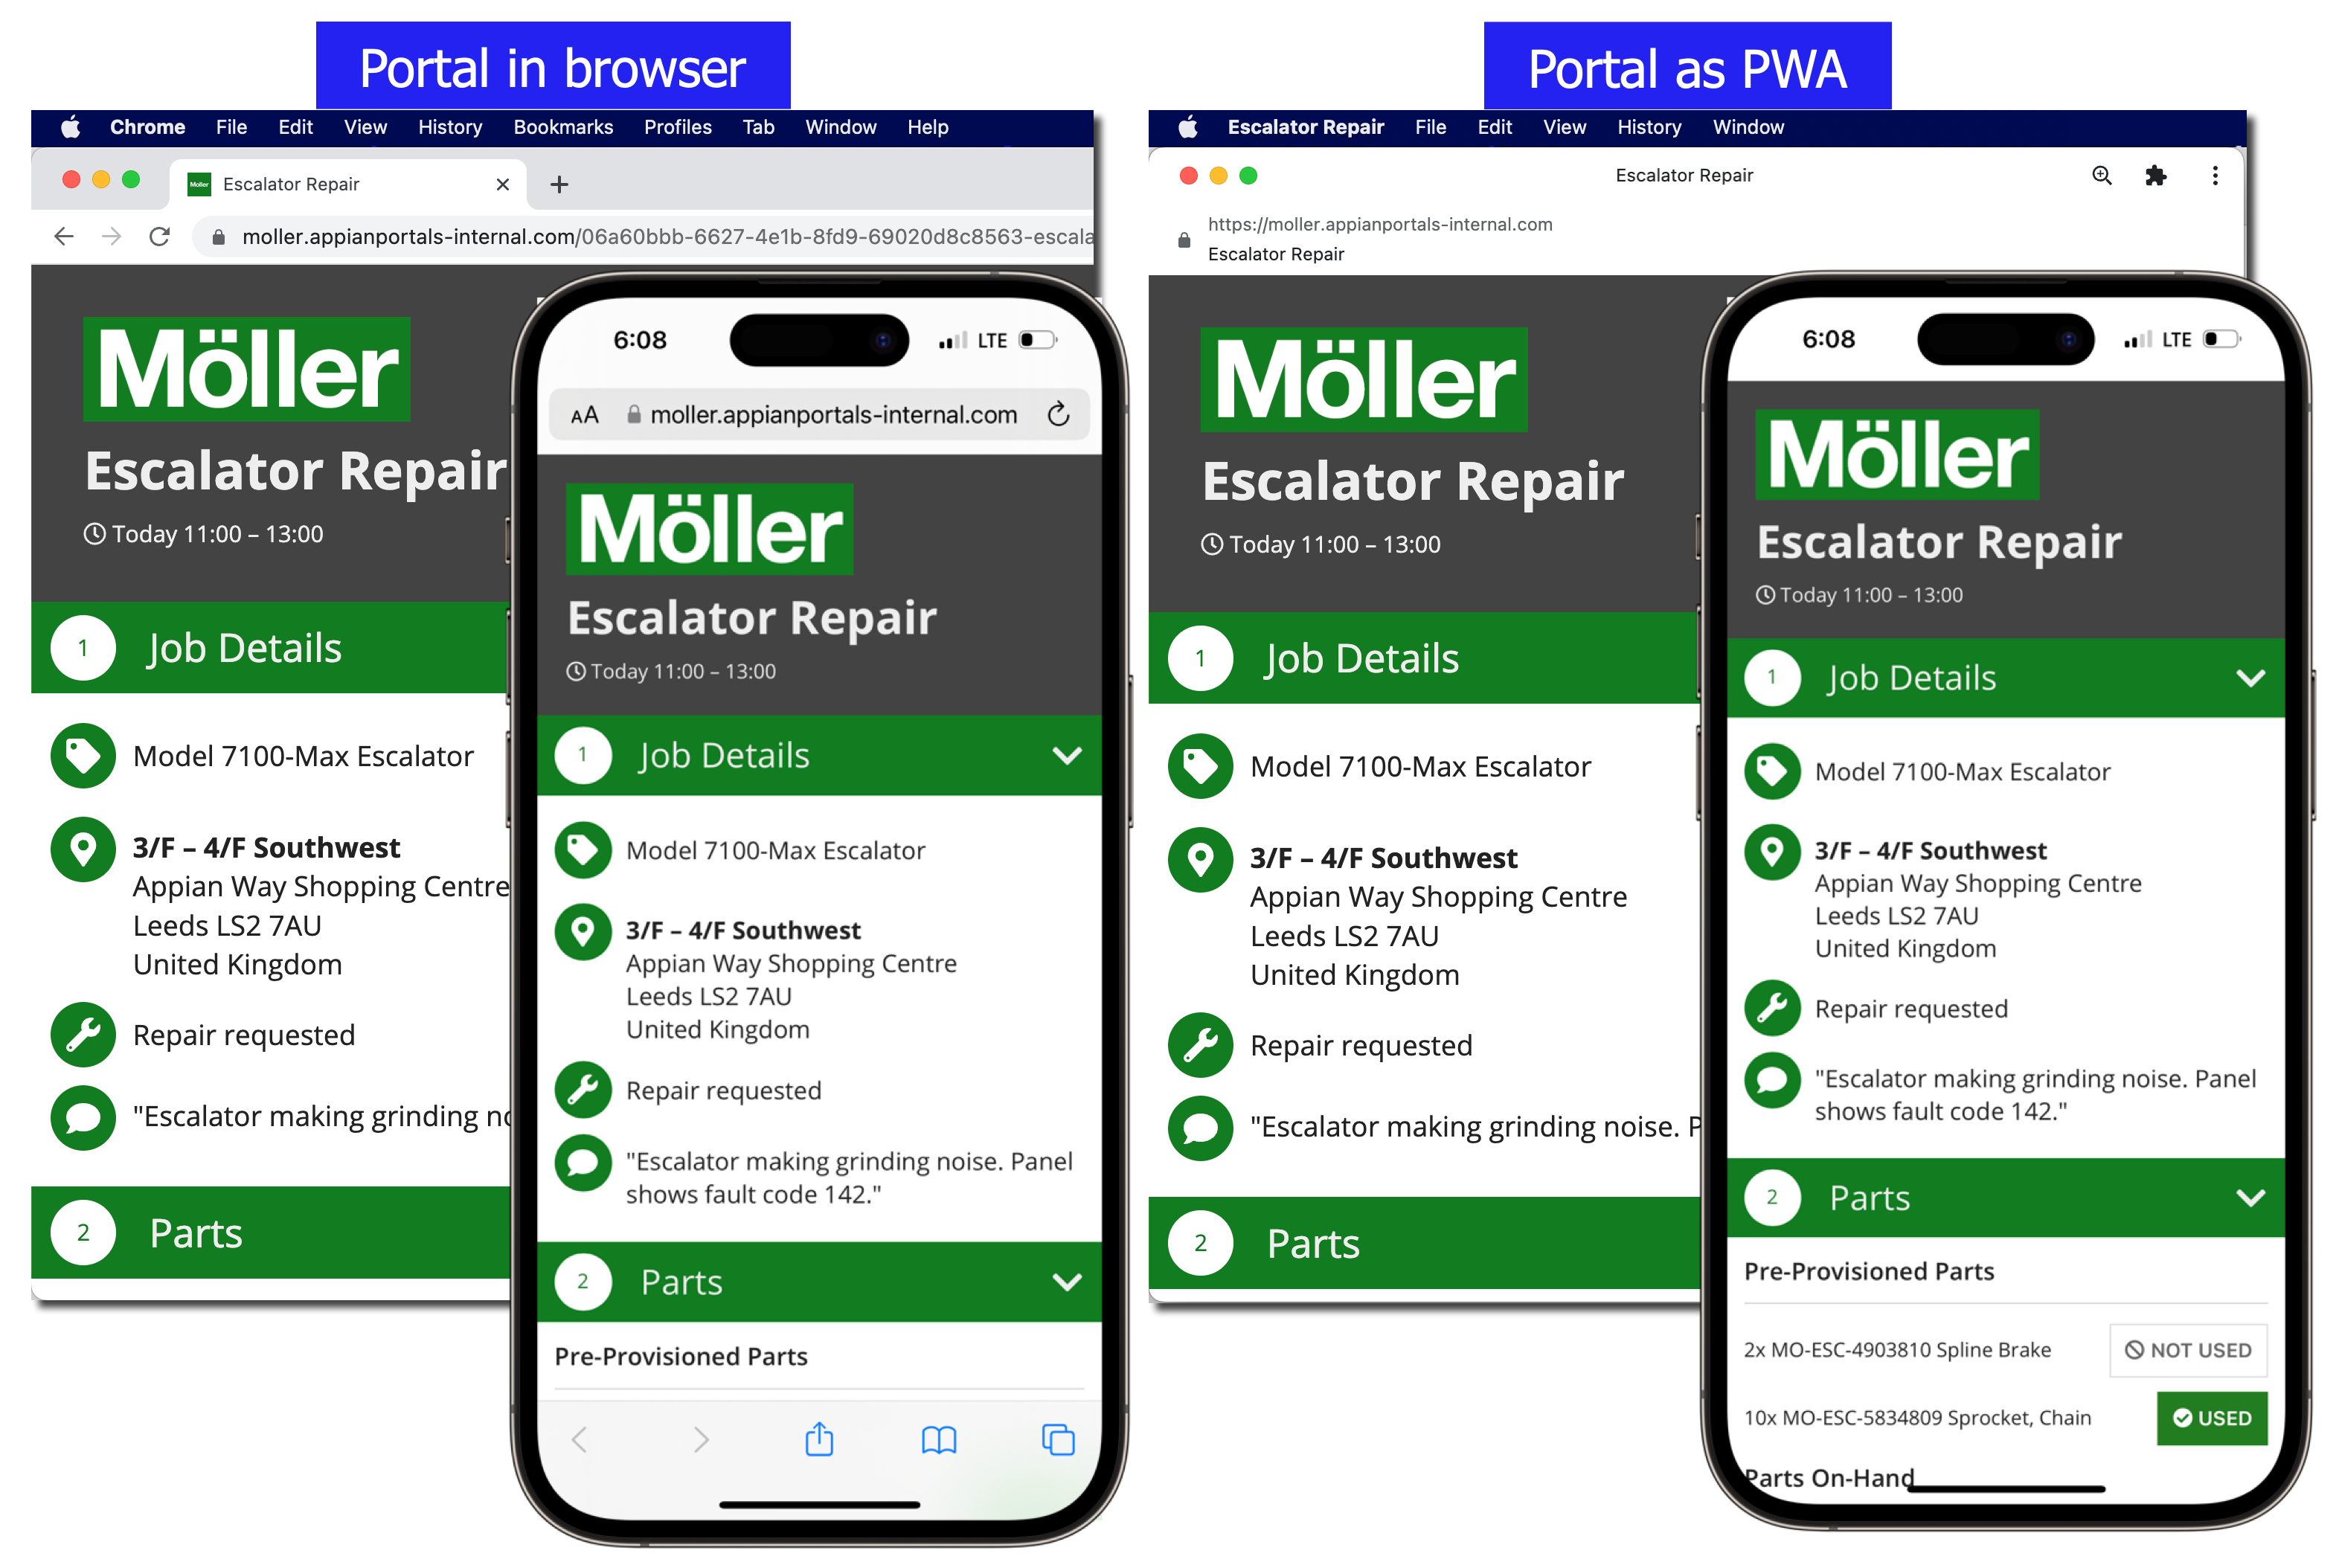 comparison of how a portal displays in a browser versus how it displays as a PWA